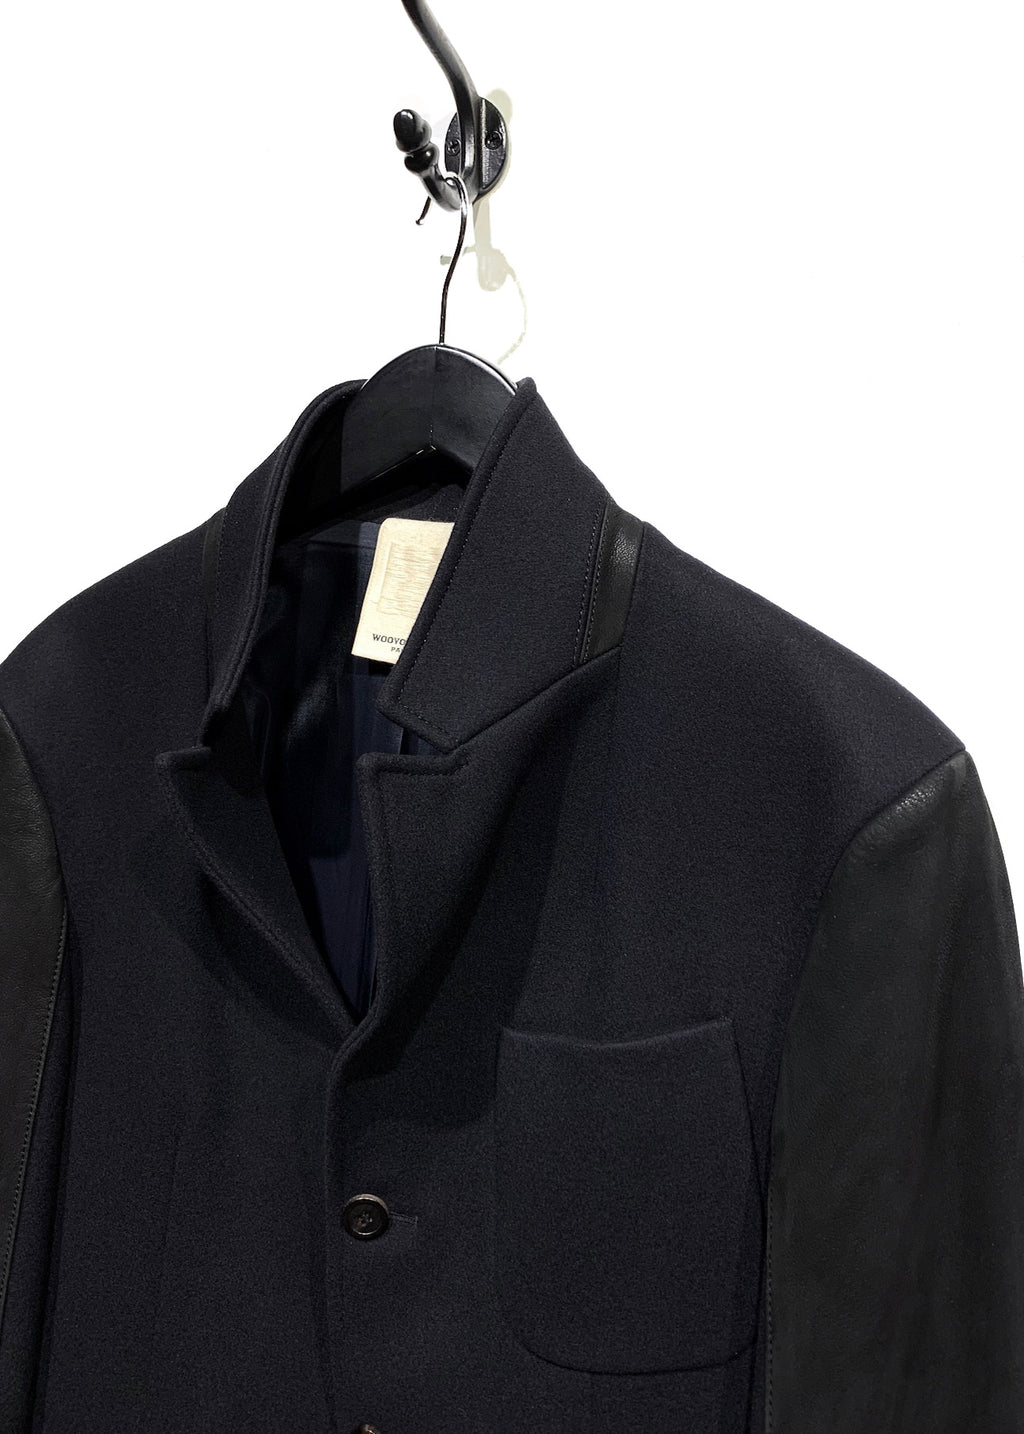 Wooyoungmi Navy Wool Blazer Jacket with Black Leather Sleeves